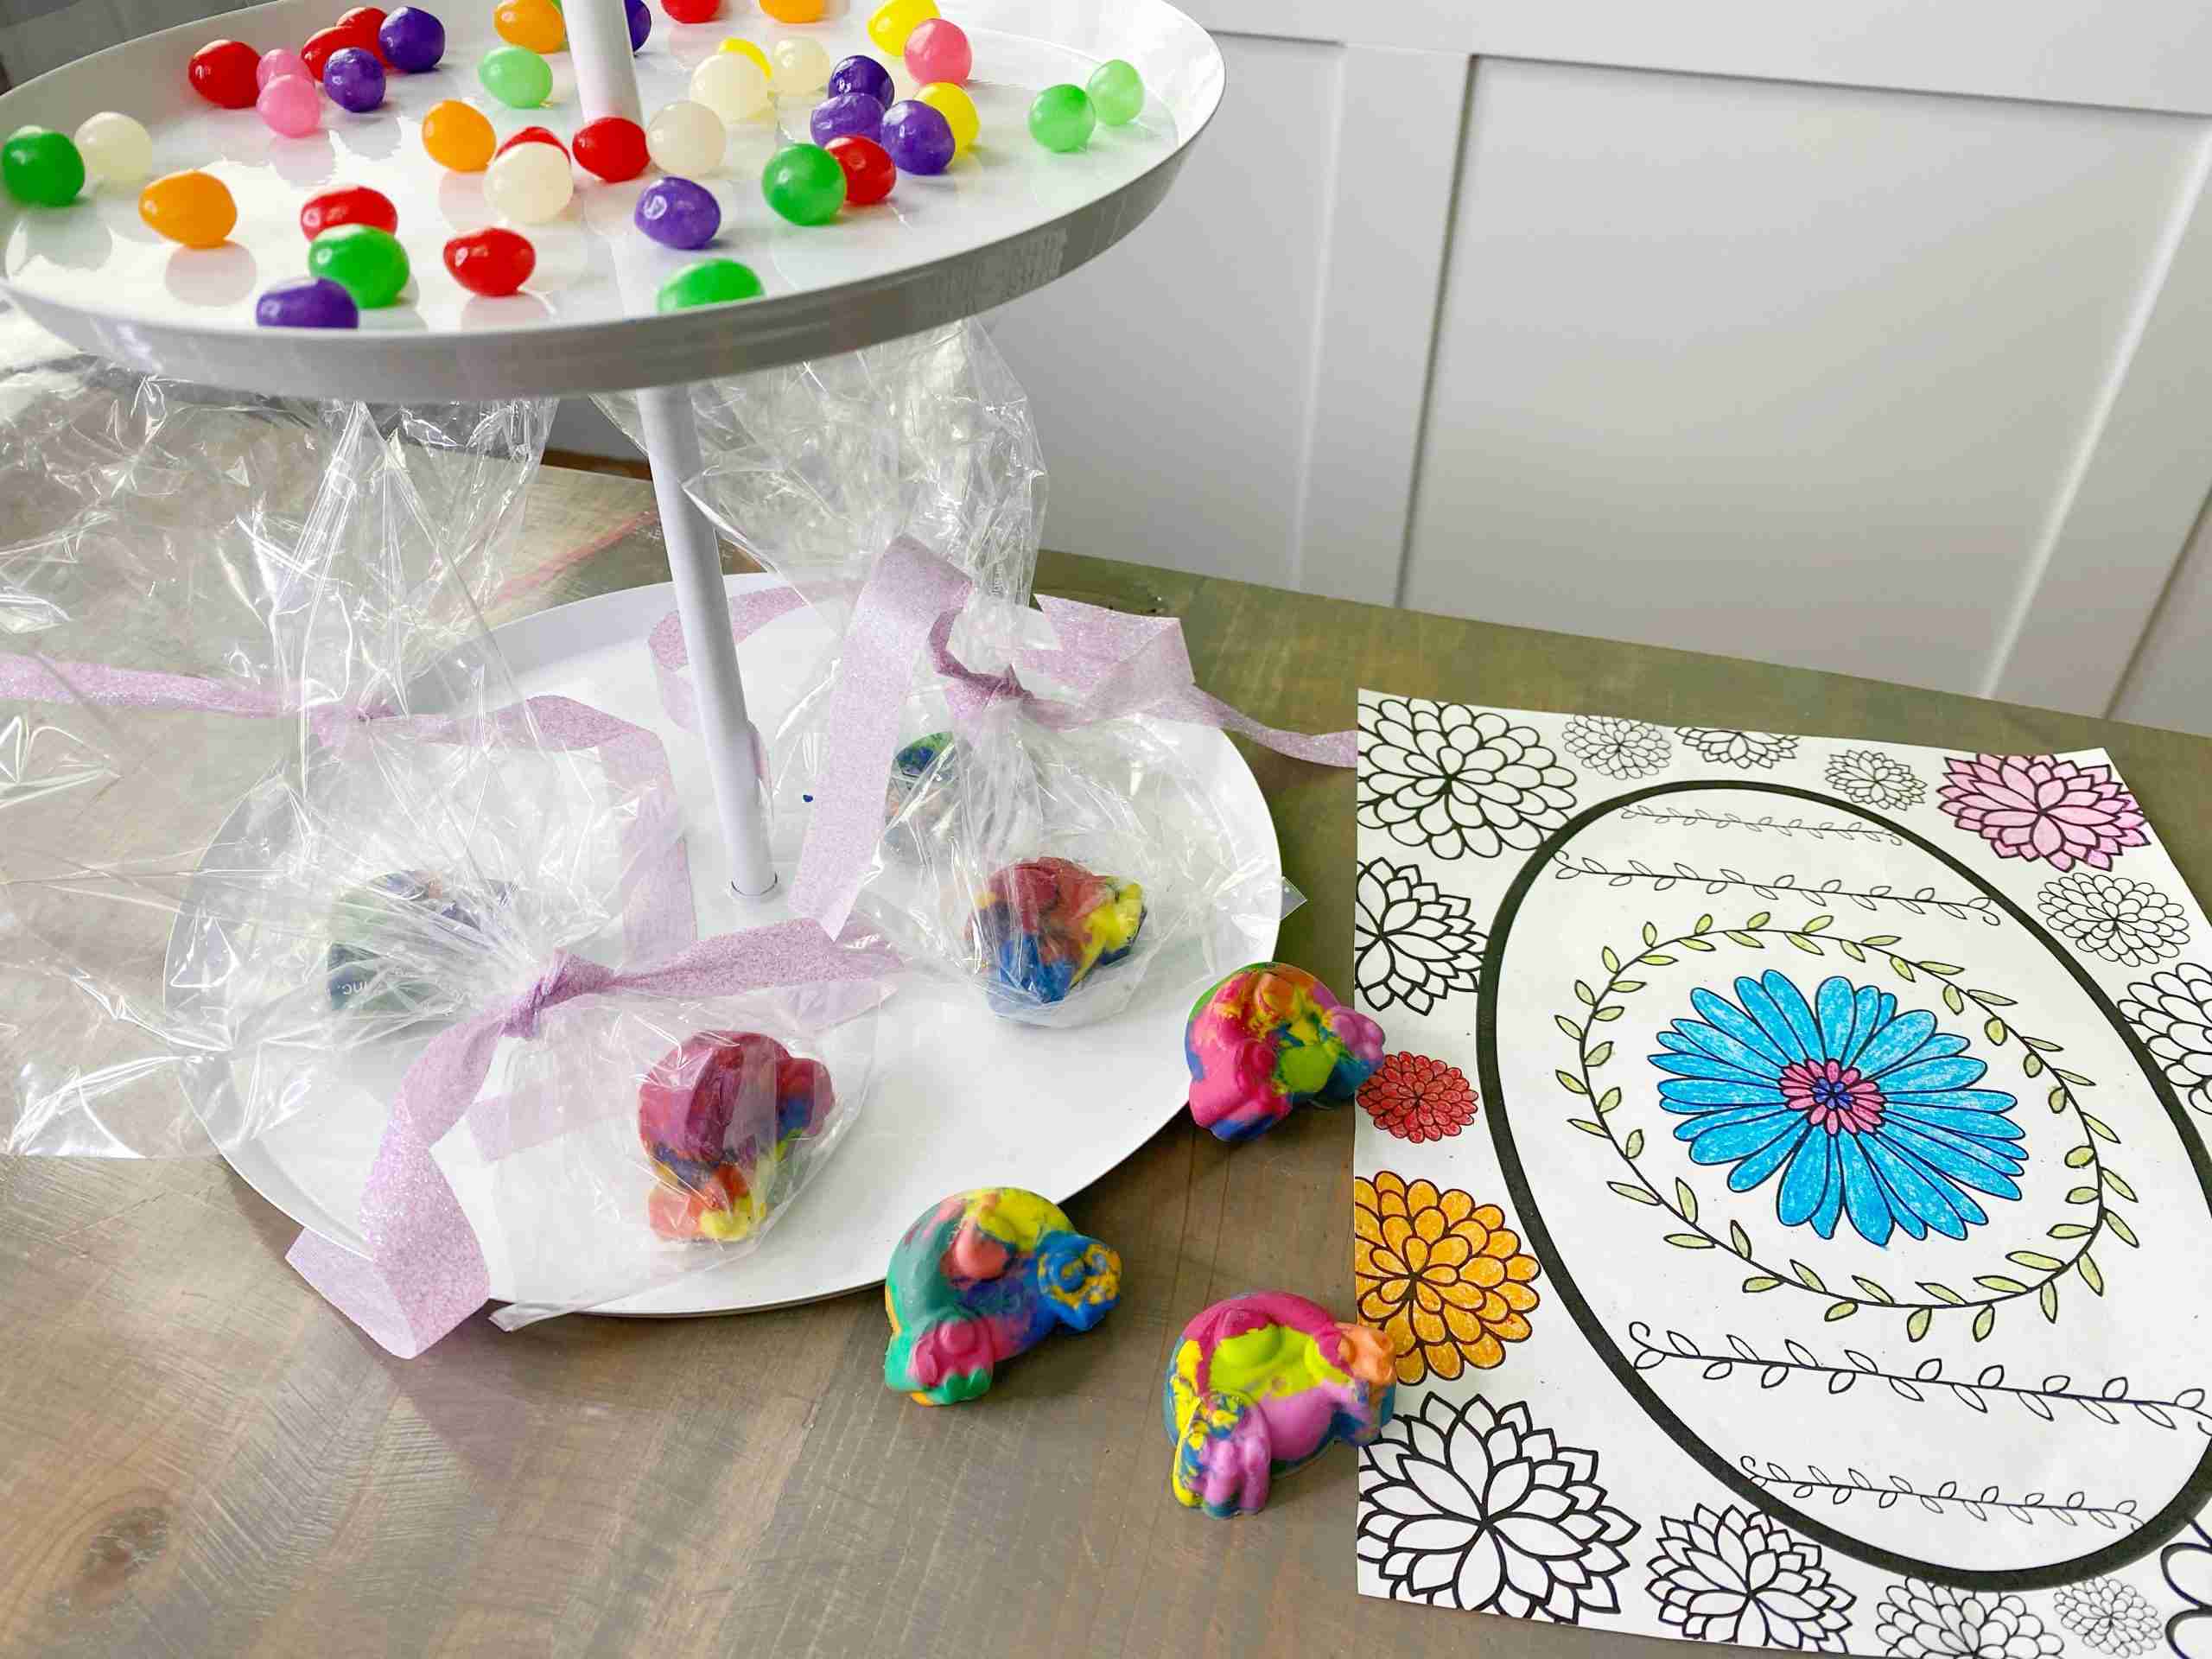 bunny bottom crayons, white target tiered tray, diy easter bunny crayons, easter crafts, melting crayons, faberge egg coloring page, free printable coloring sheet, easter coloring page, spring crafts, kids crafts, easter basket